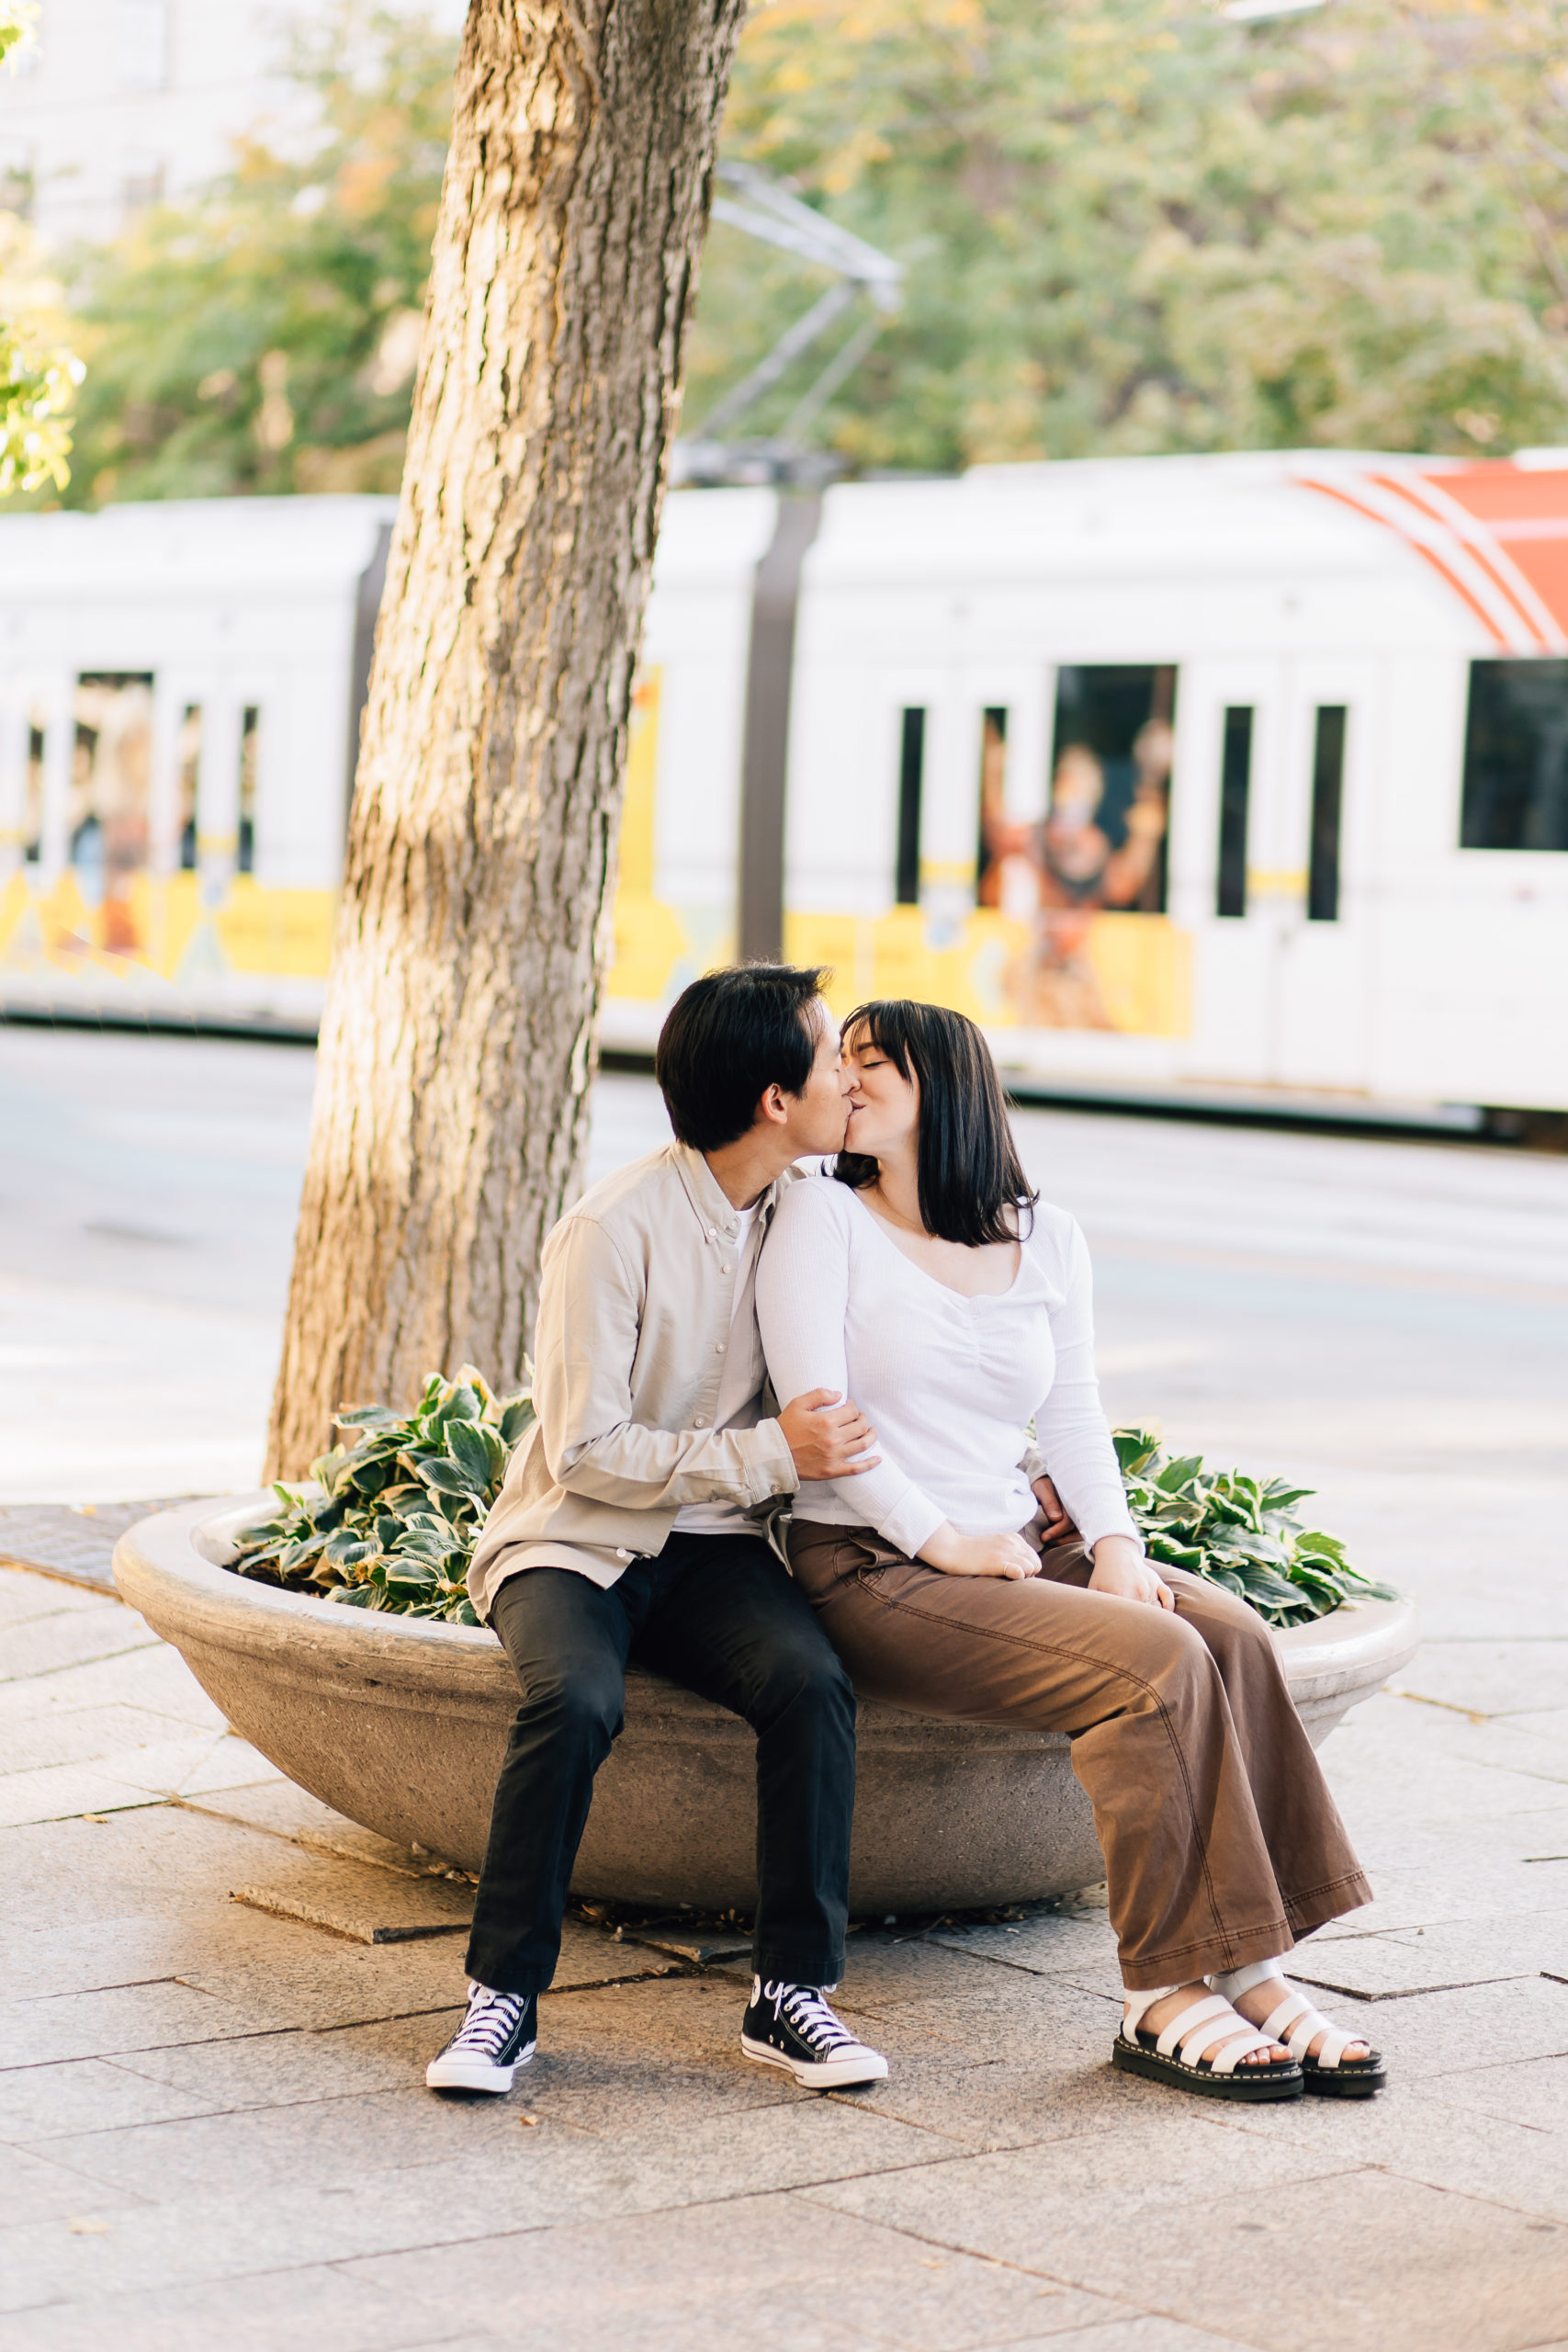 Engagement Photographer Kailee Matsumura Photography captures soon to be married couple kissing by the frontrunner. city engagements #KaileeMatsumuraPhotography #KailleMatsumuraEngagements #SLCengagement #Utahphotographers #engagementphotography